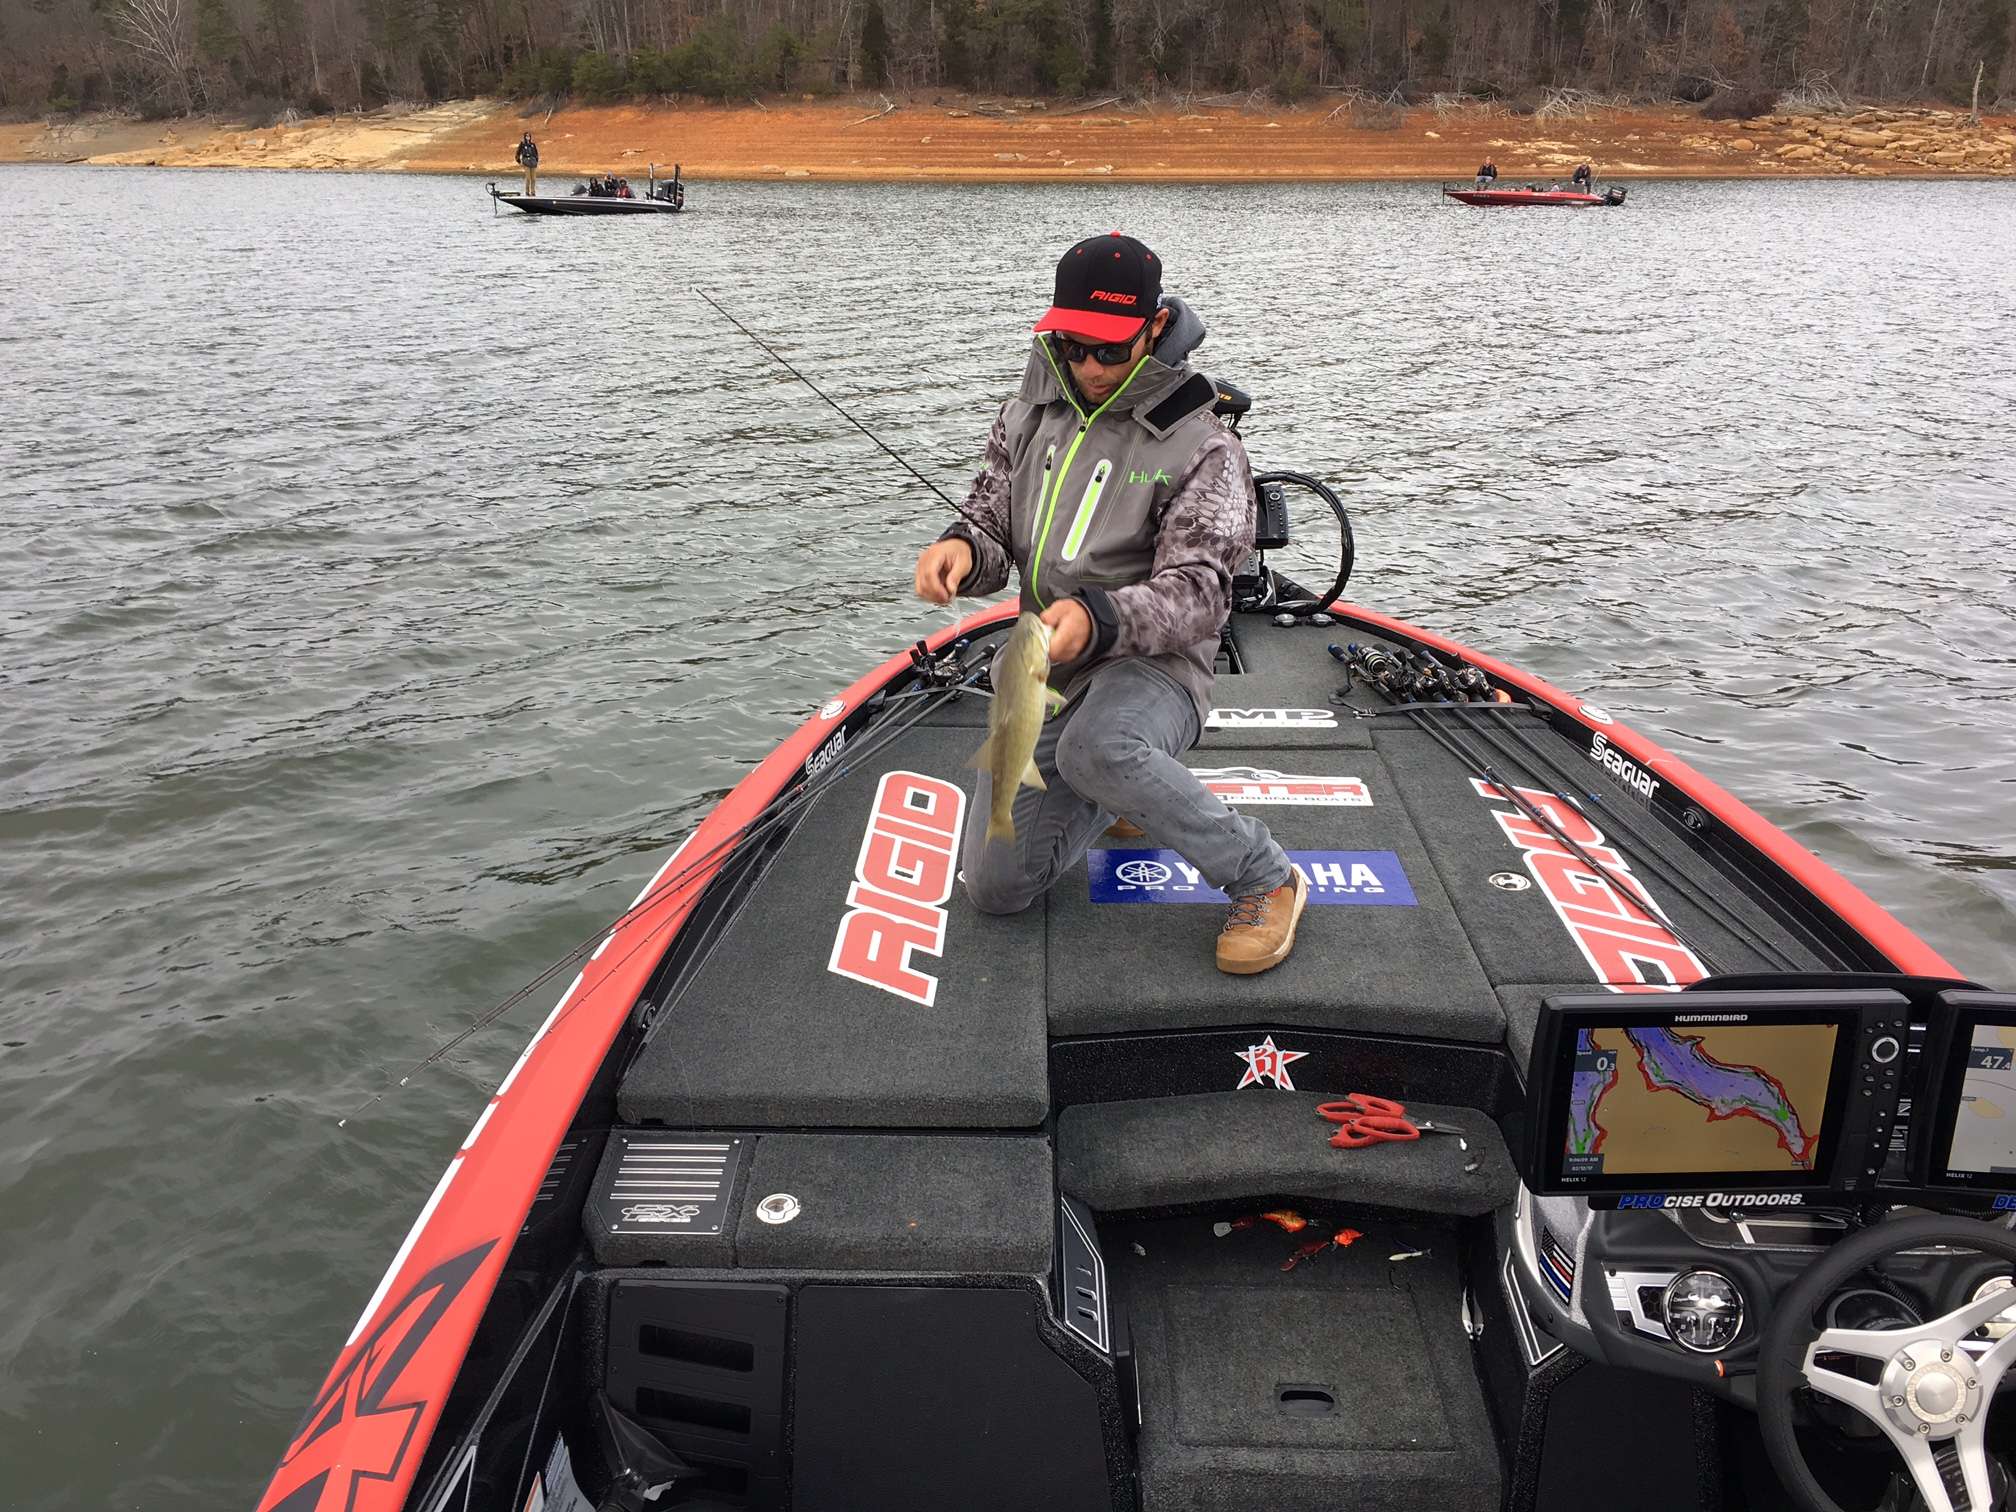 Palaniuk adds two to the box. He found a couple wanting to participate, would like to get on the bigger fish soon.
